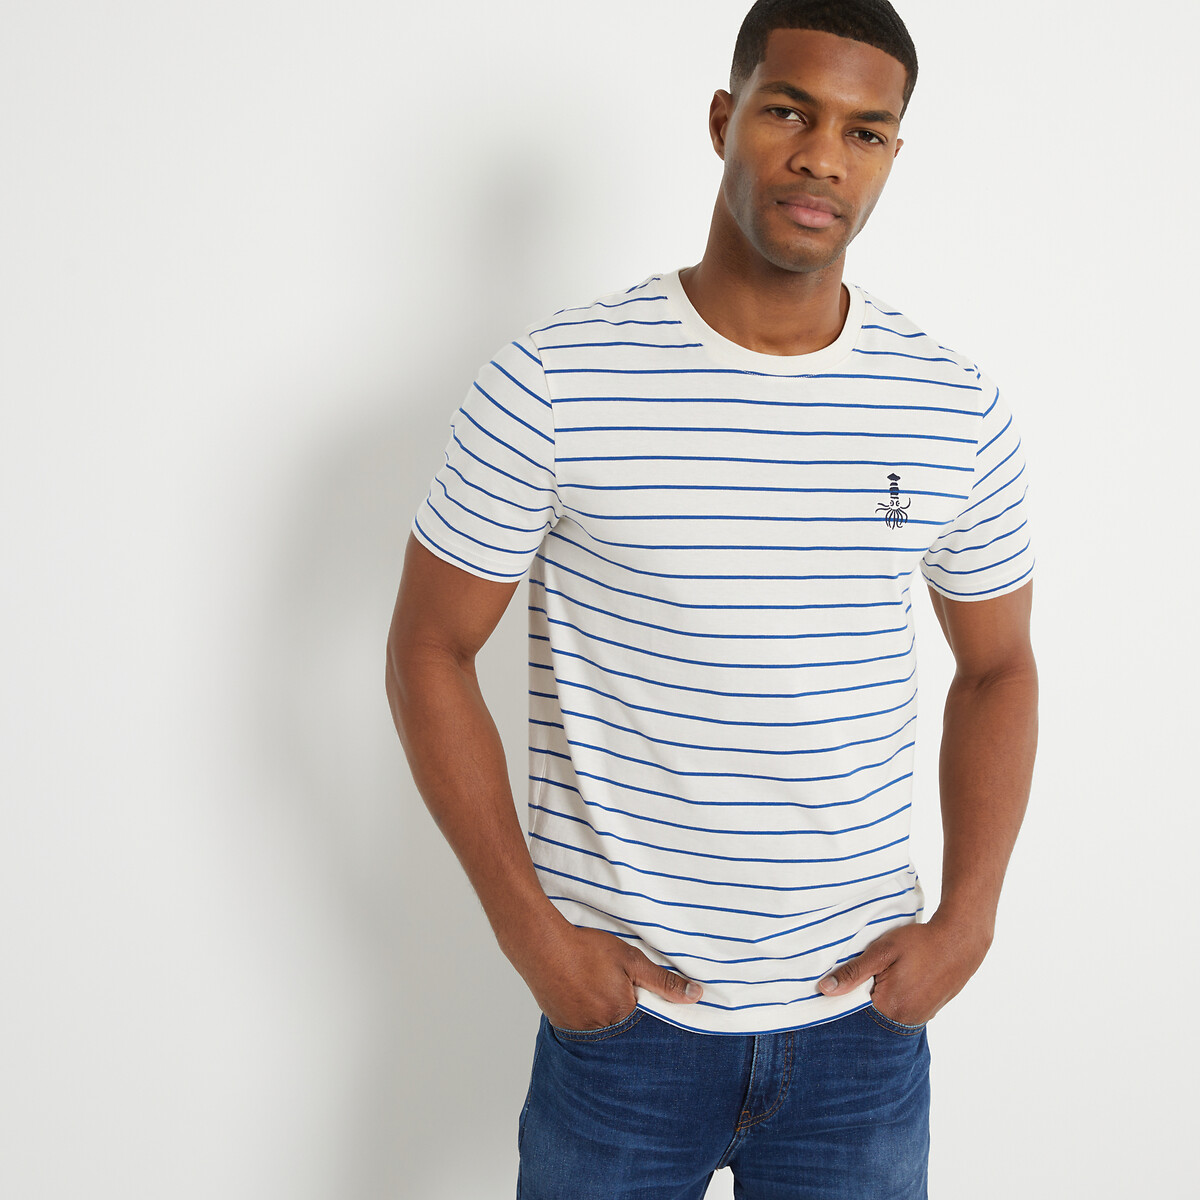 Breton Stripe Cotton T-Shirt with Crew Neck and Short Sleeves